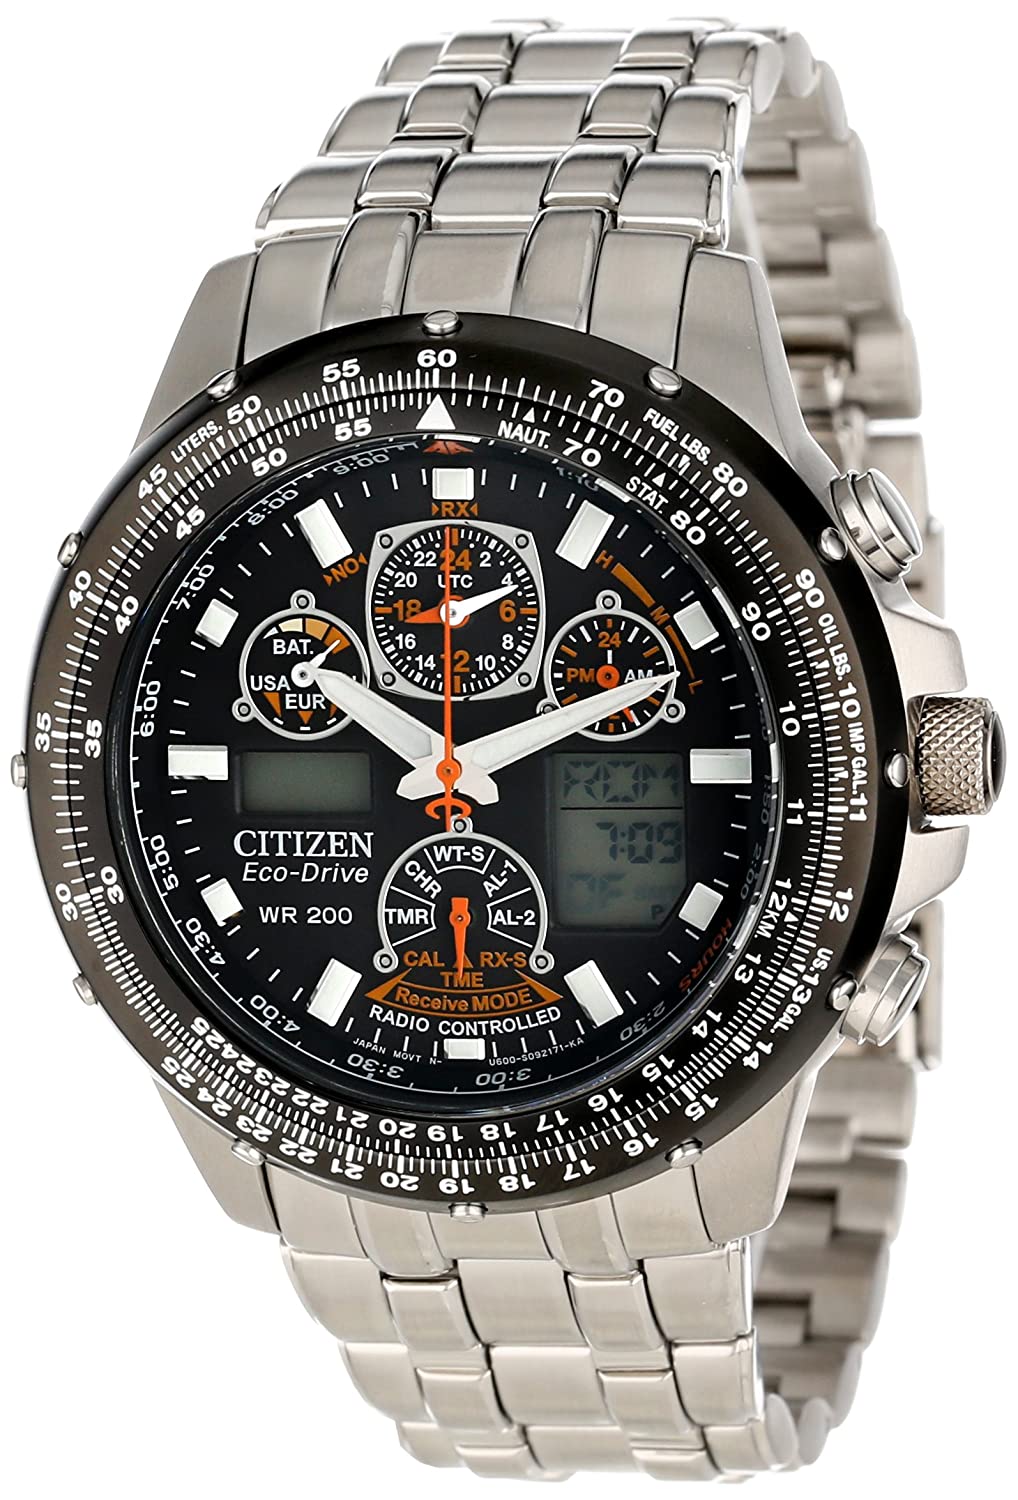 Citizen Eco Drive Wr200 User Manual - imagetree